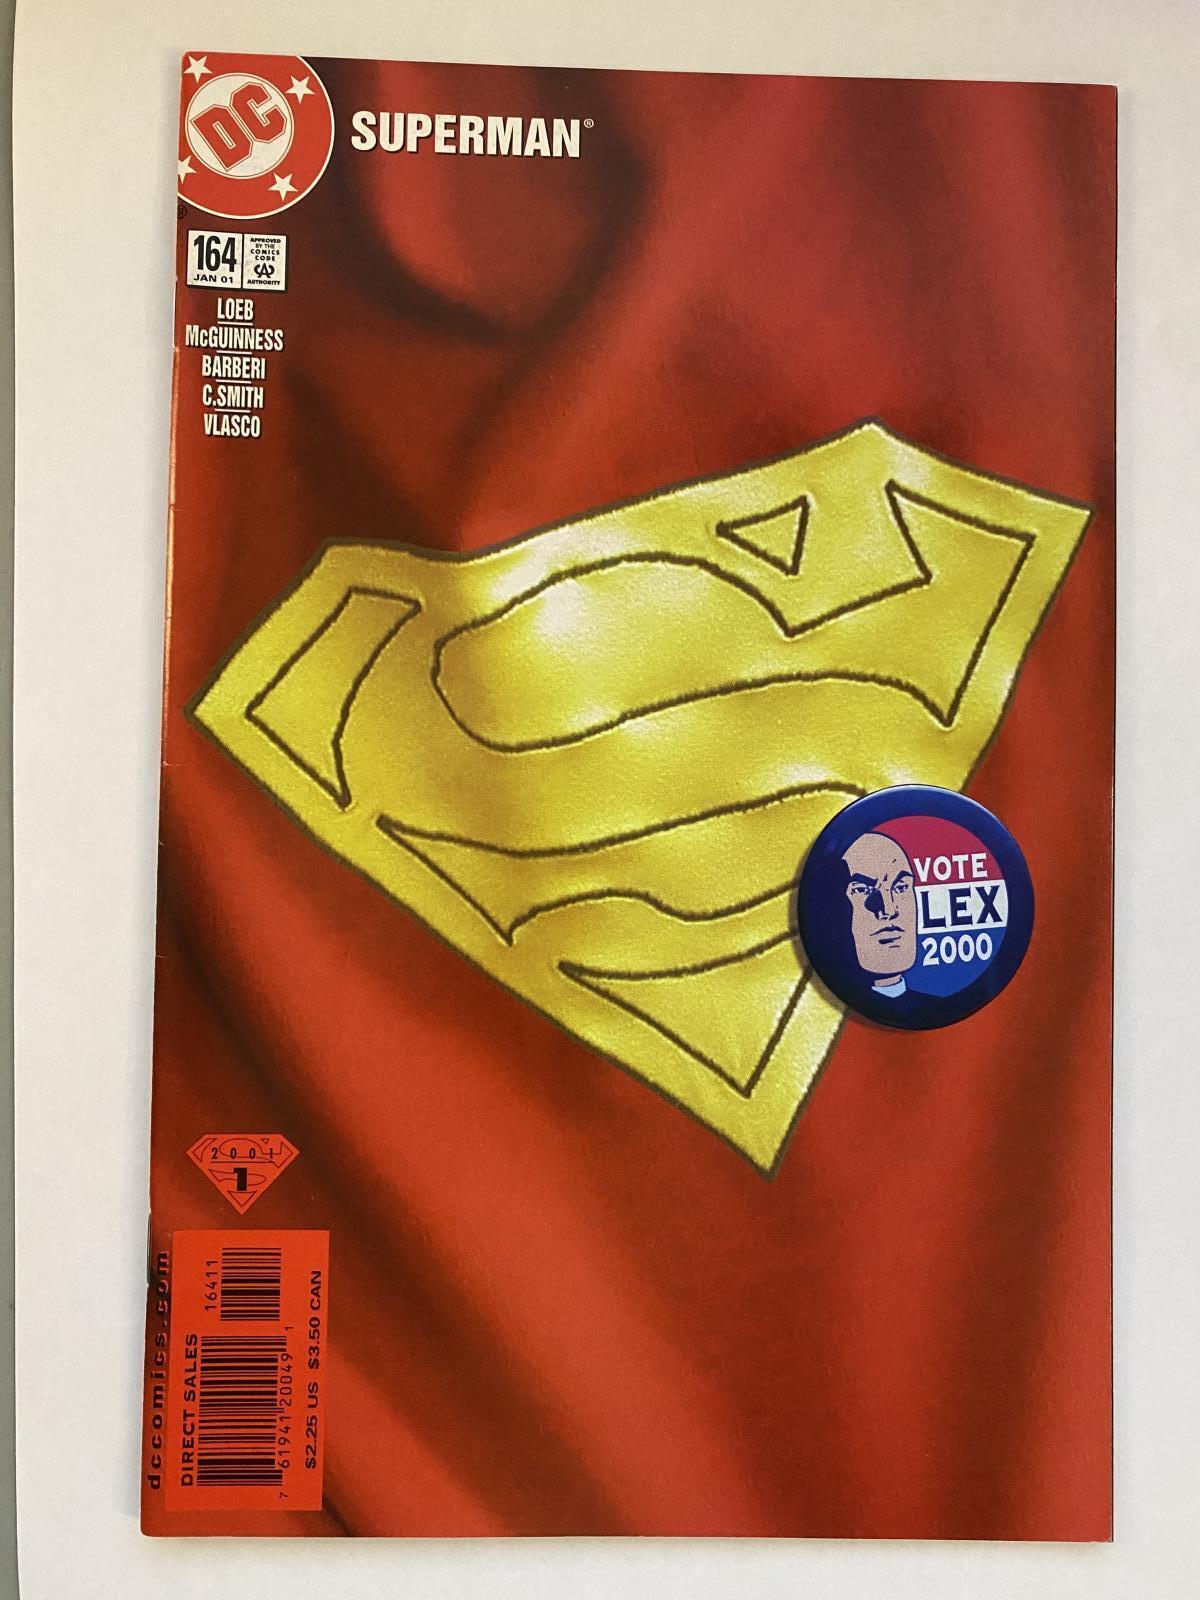 Superman #164 VF+ Combined Shipping